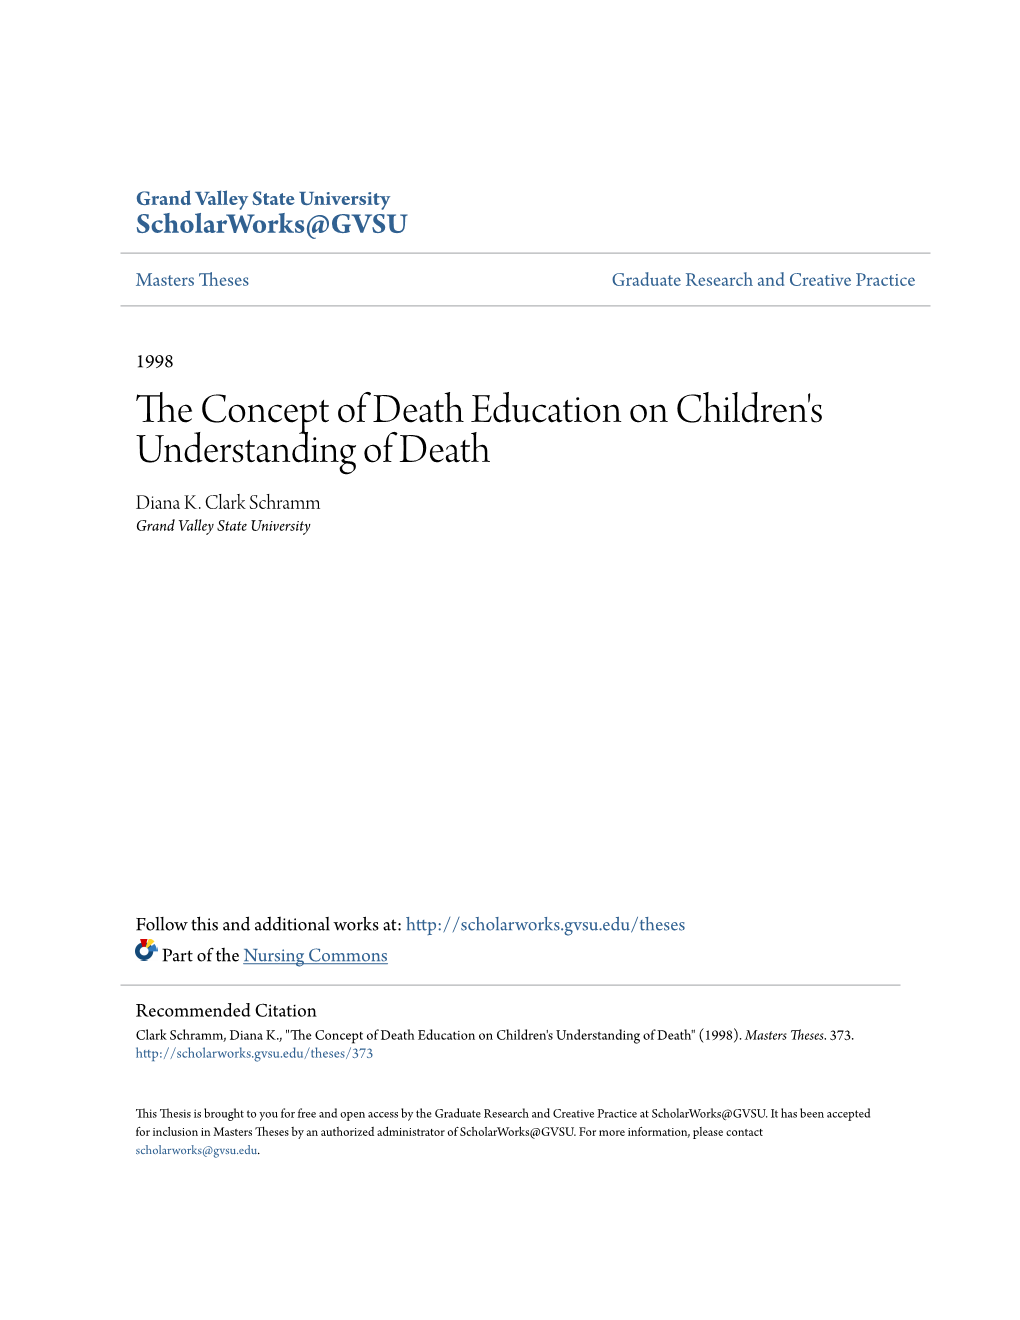 The Concept of Death Education on Children's Understanding of Death